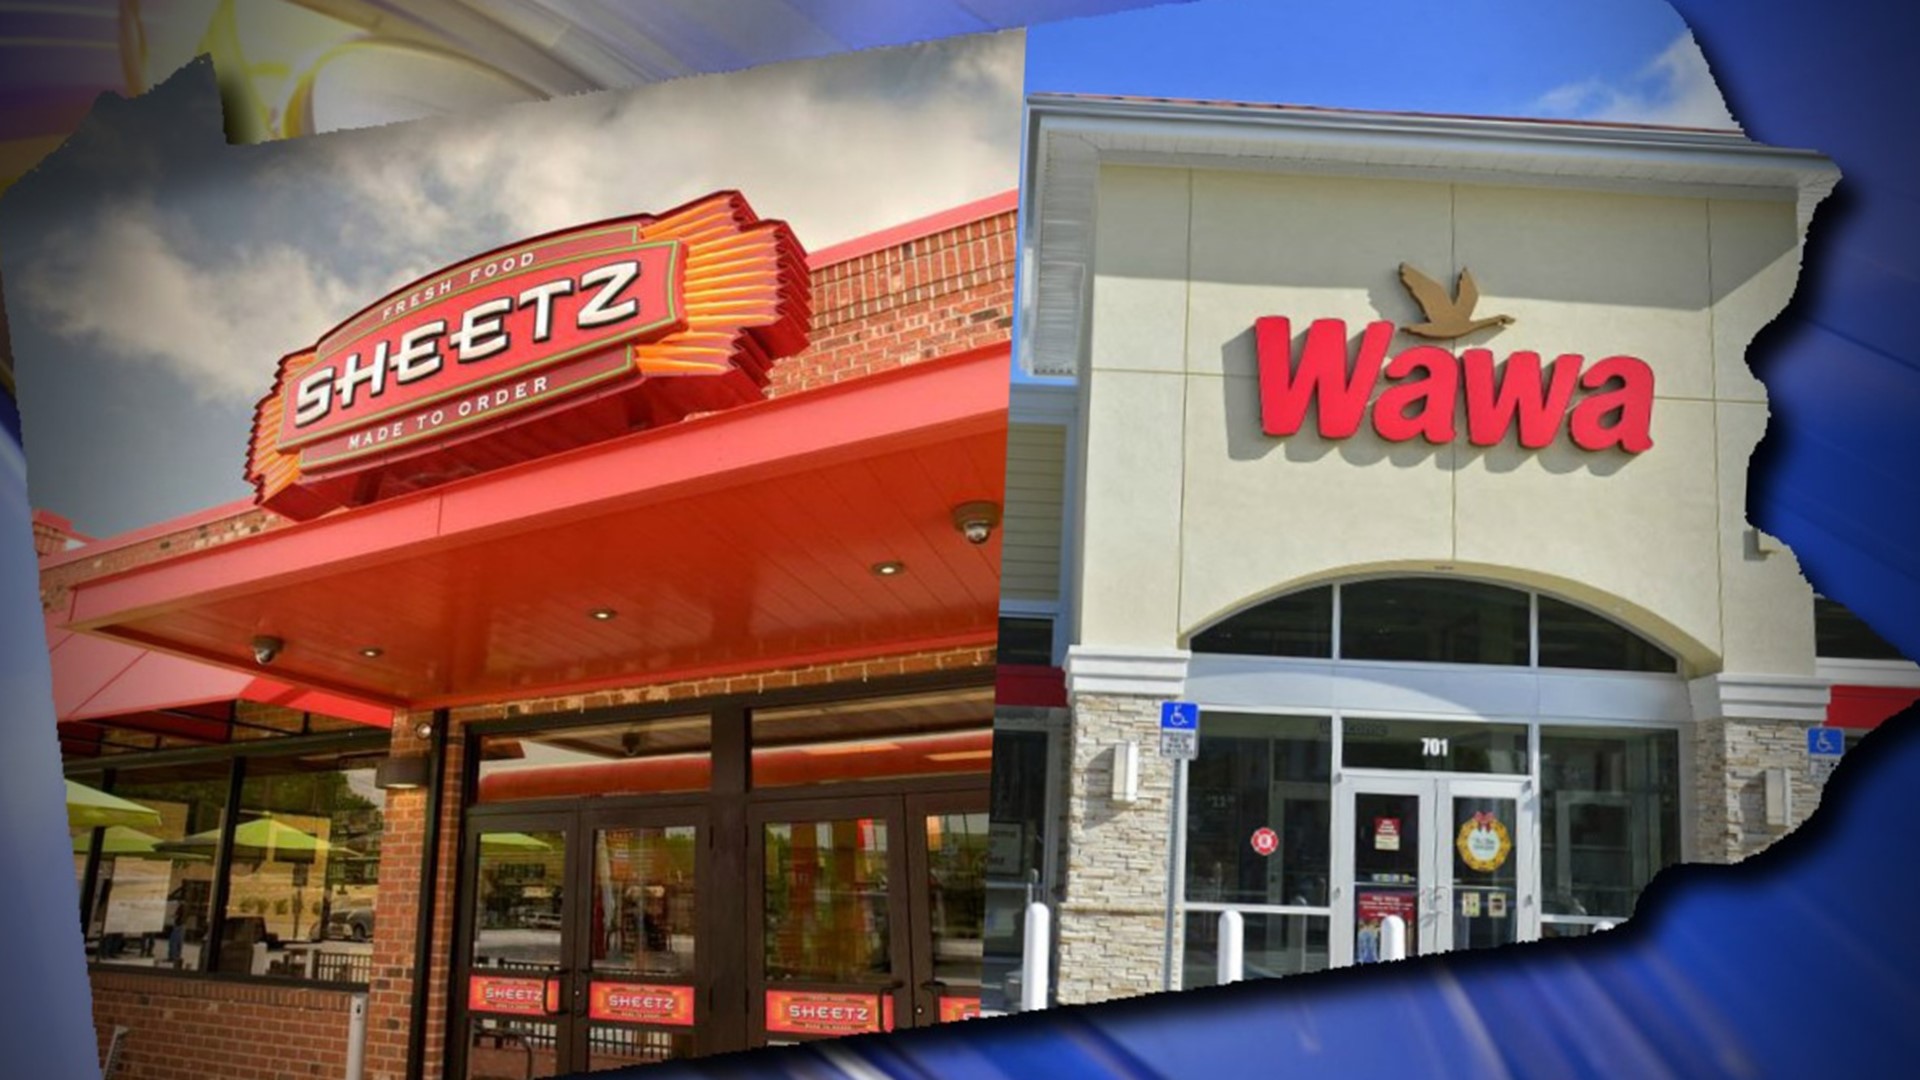 The company announced plans to expand into areas already being served by Sheetz stores.